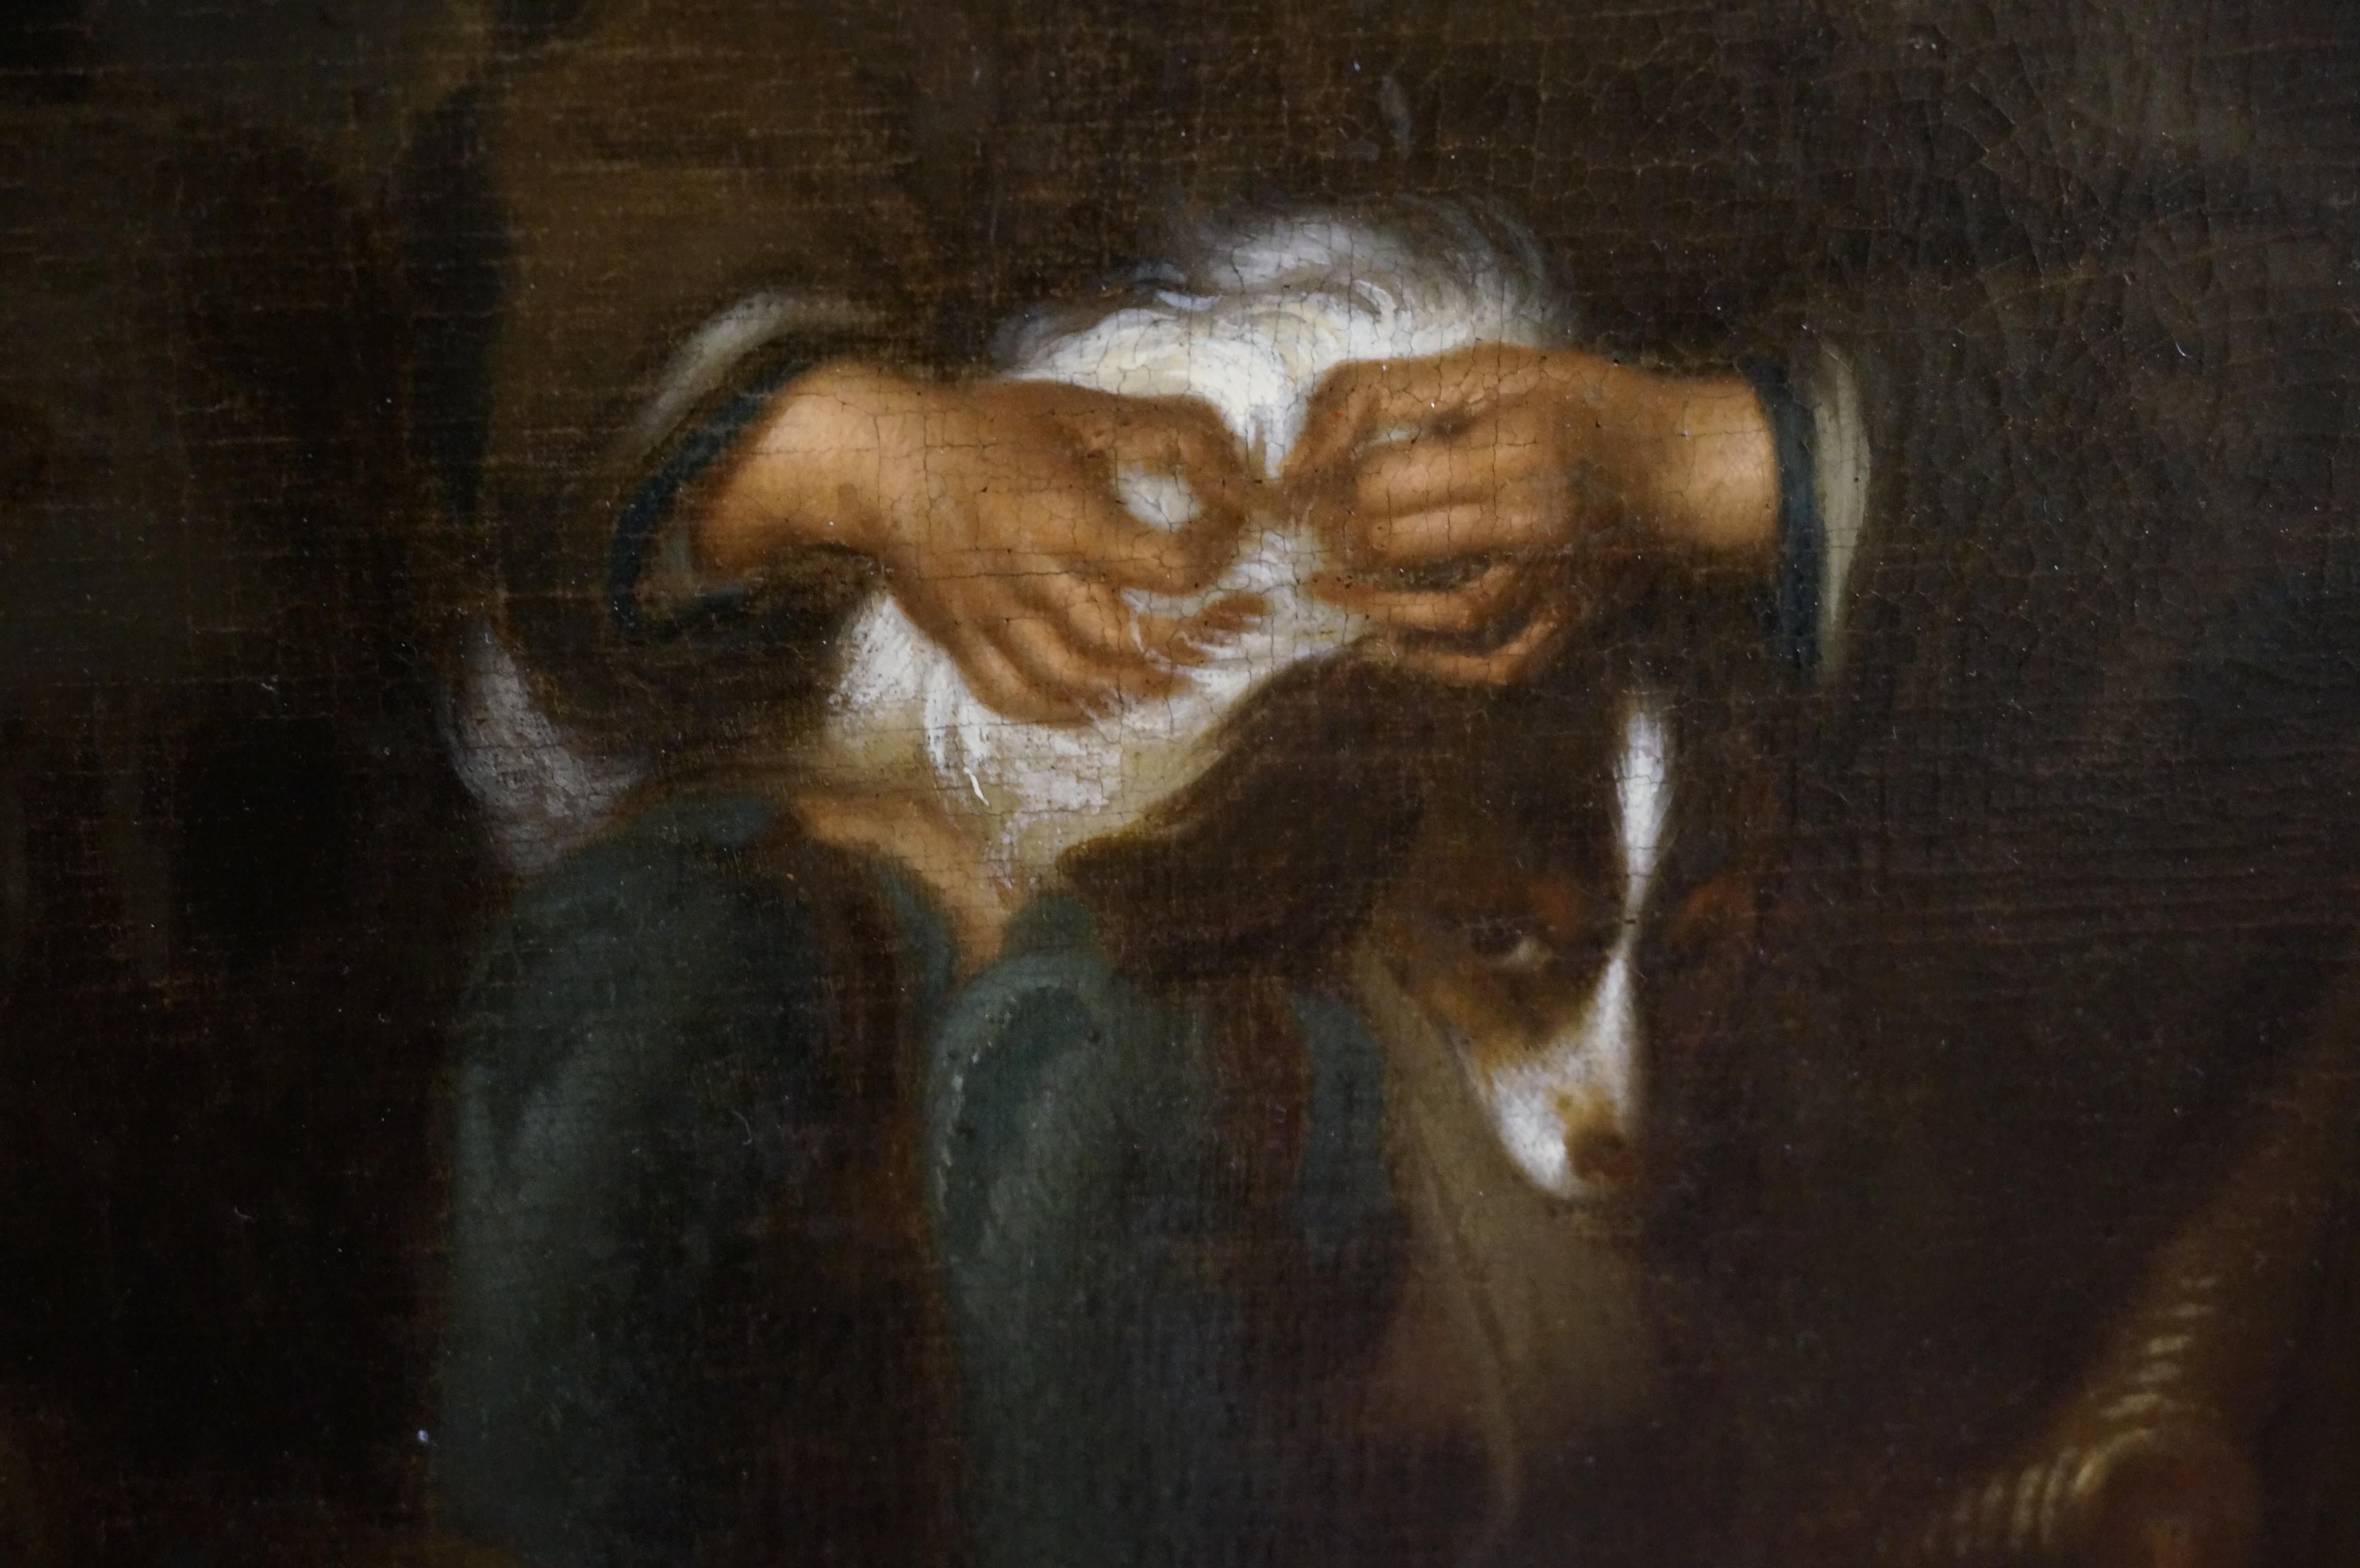 Gerard ter Borch (II) (1617-1681), copy after, around 1700
'Boy Fleaing a Dog'
Oil on canvas
Professionally restored (cleaned and relined)
In modern frame in 17th century style

Dimensions excl. frame: 33 x 27,5 cm.
Dimensions incl. frame: approx.